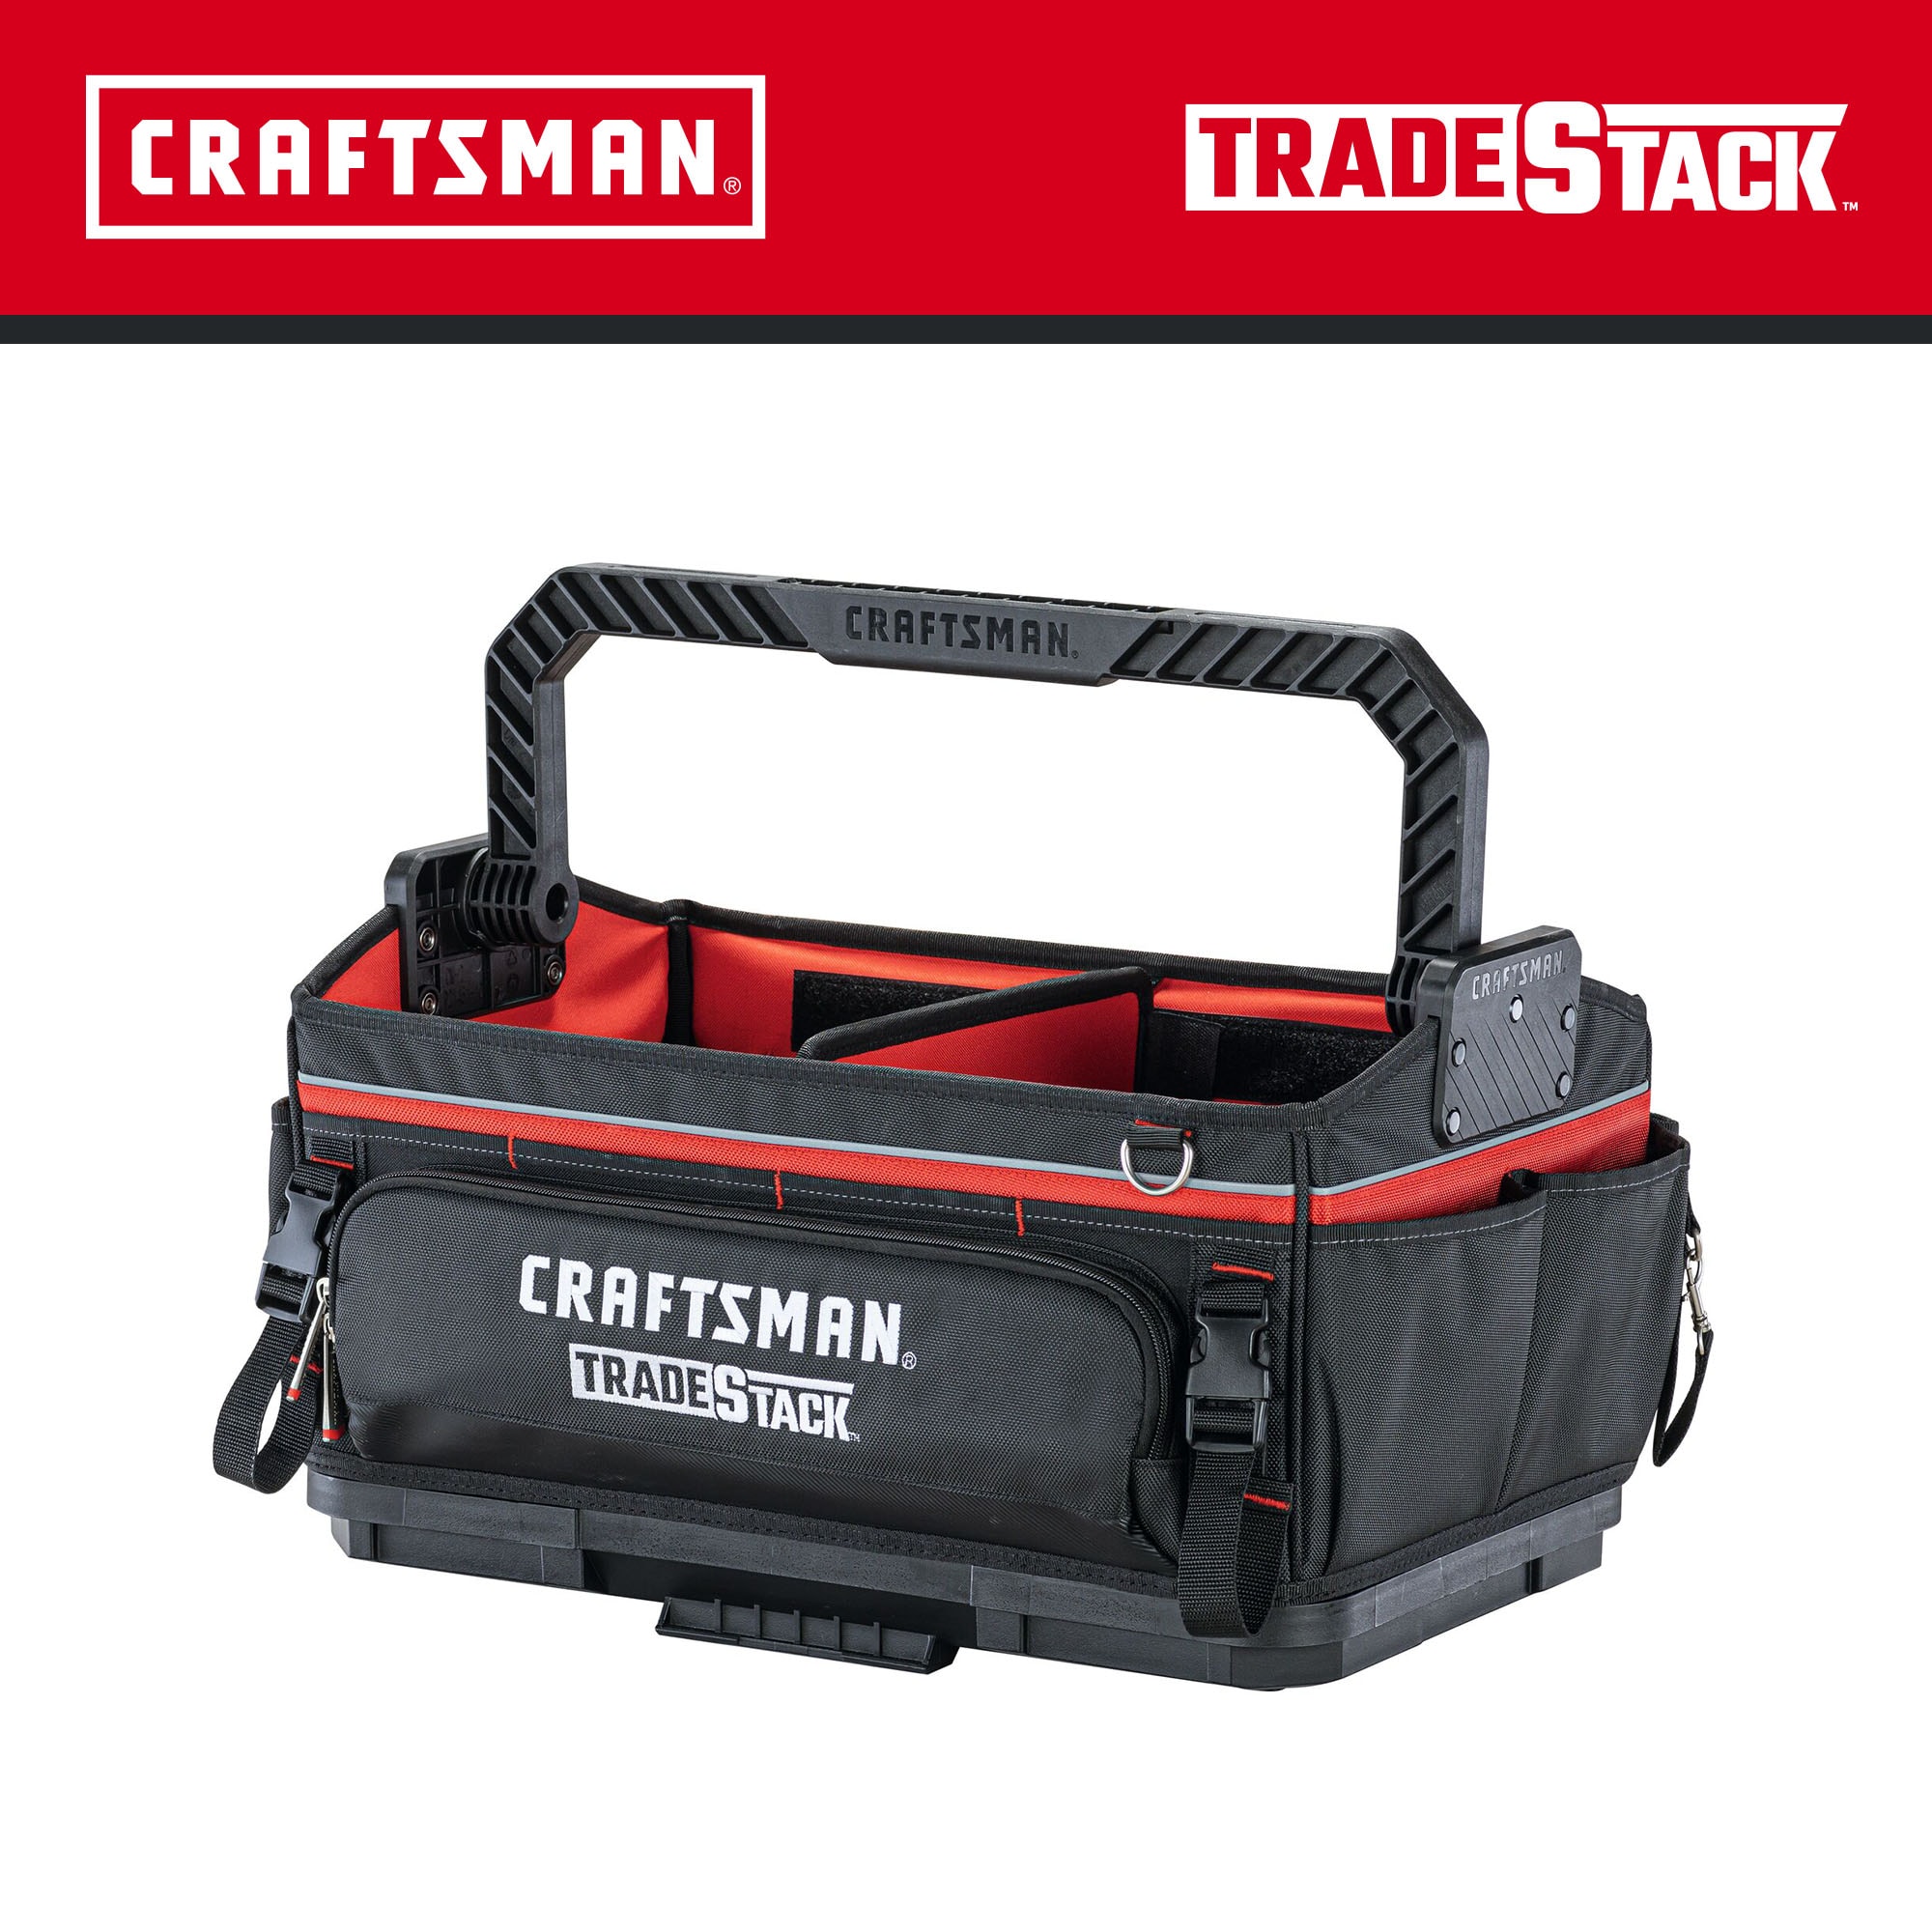 CRAFTSMAN TRADESTACK System Black/Red Polyester 22.375-in Zippered